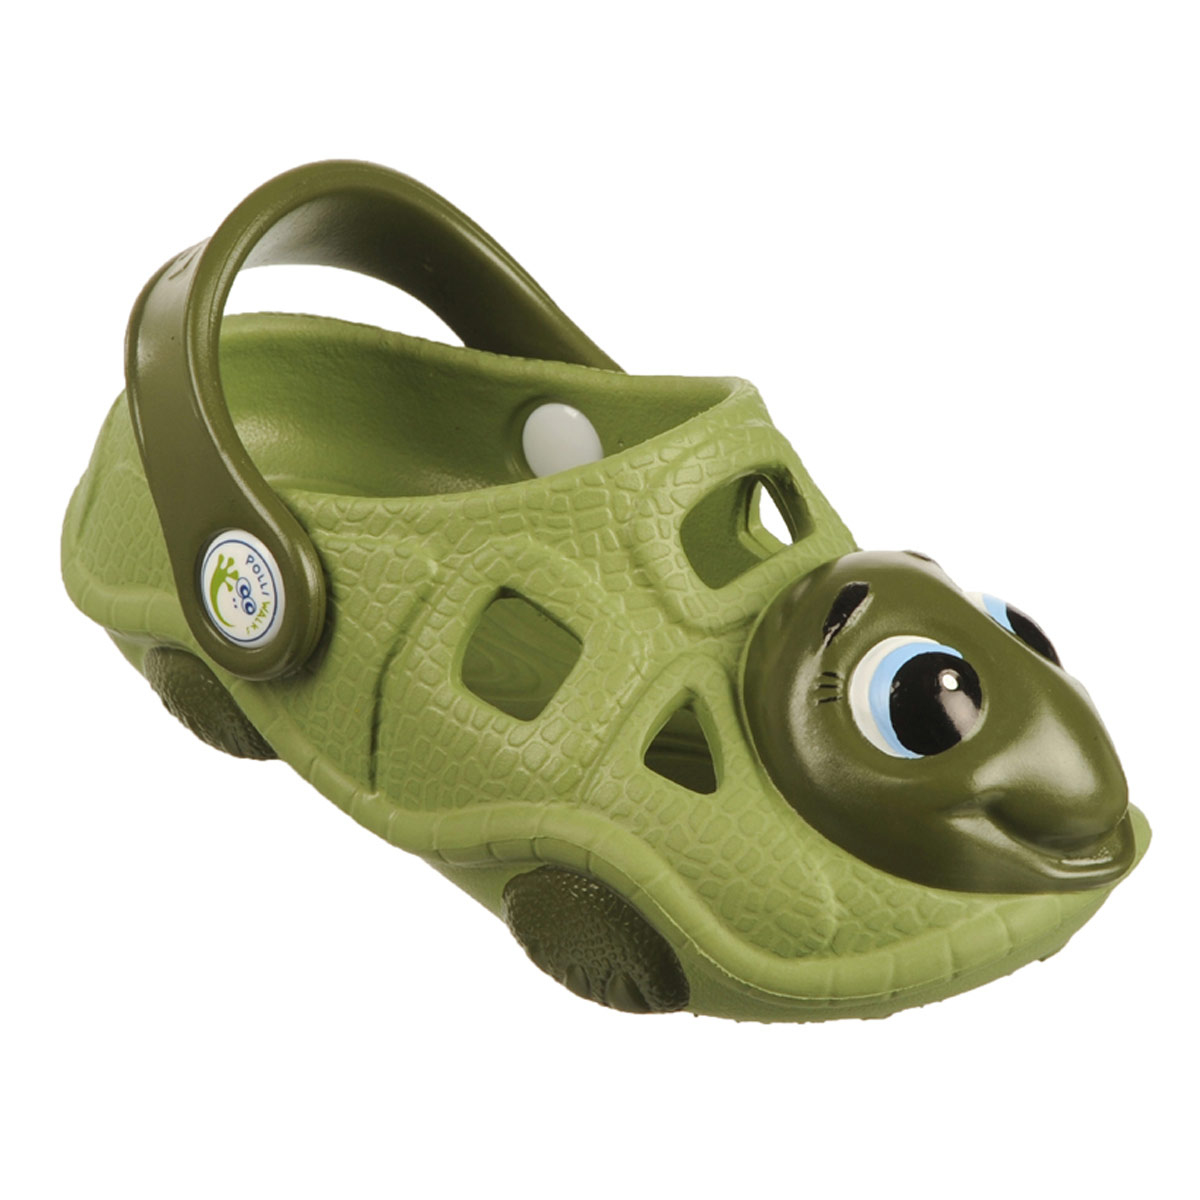 Polliwalks : Toddler shoes Timmy the Turtle Green # 6